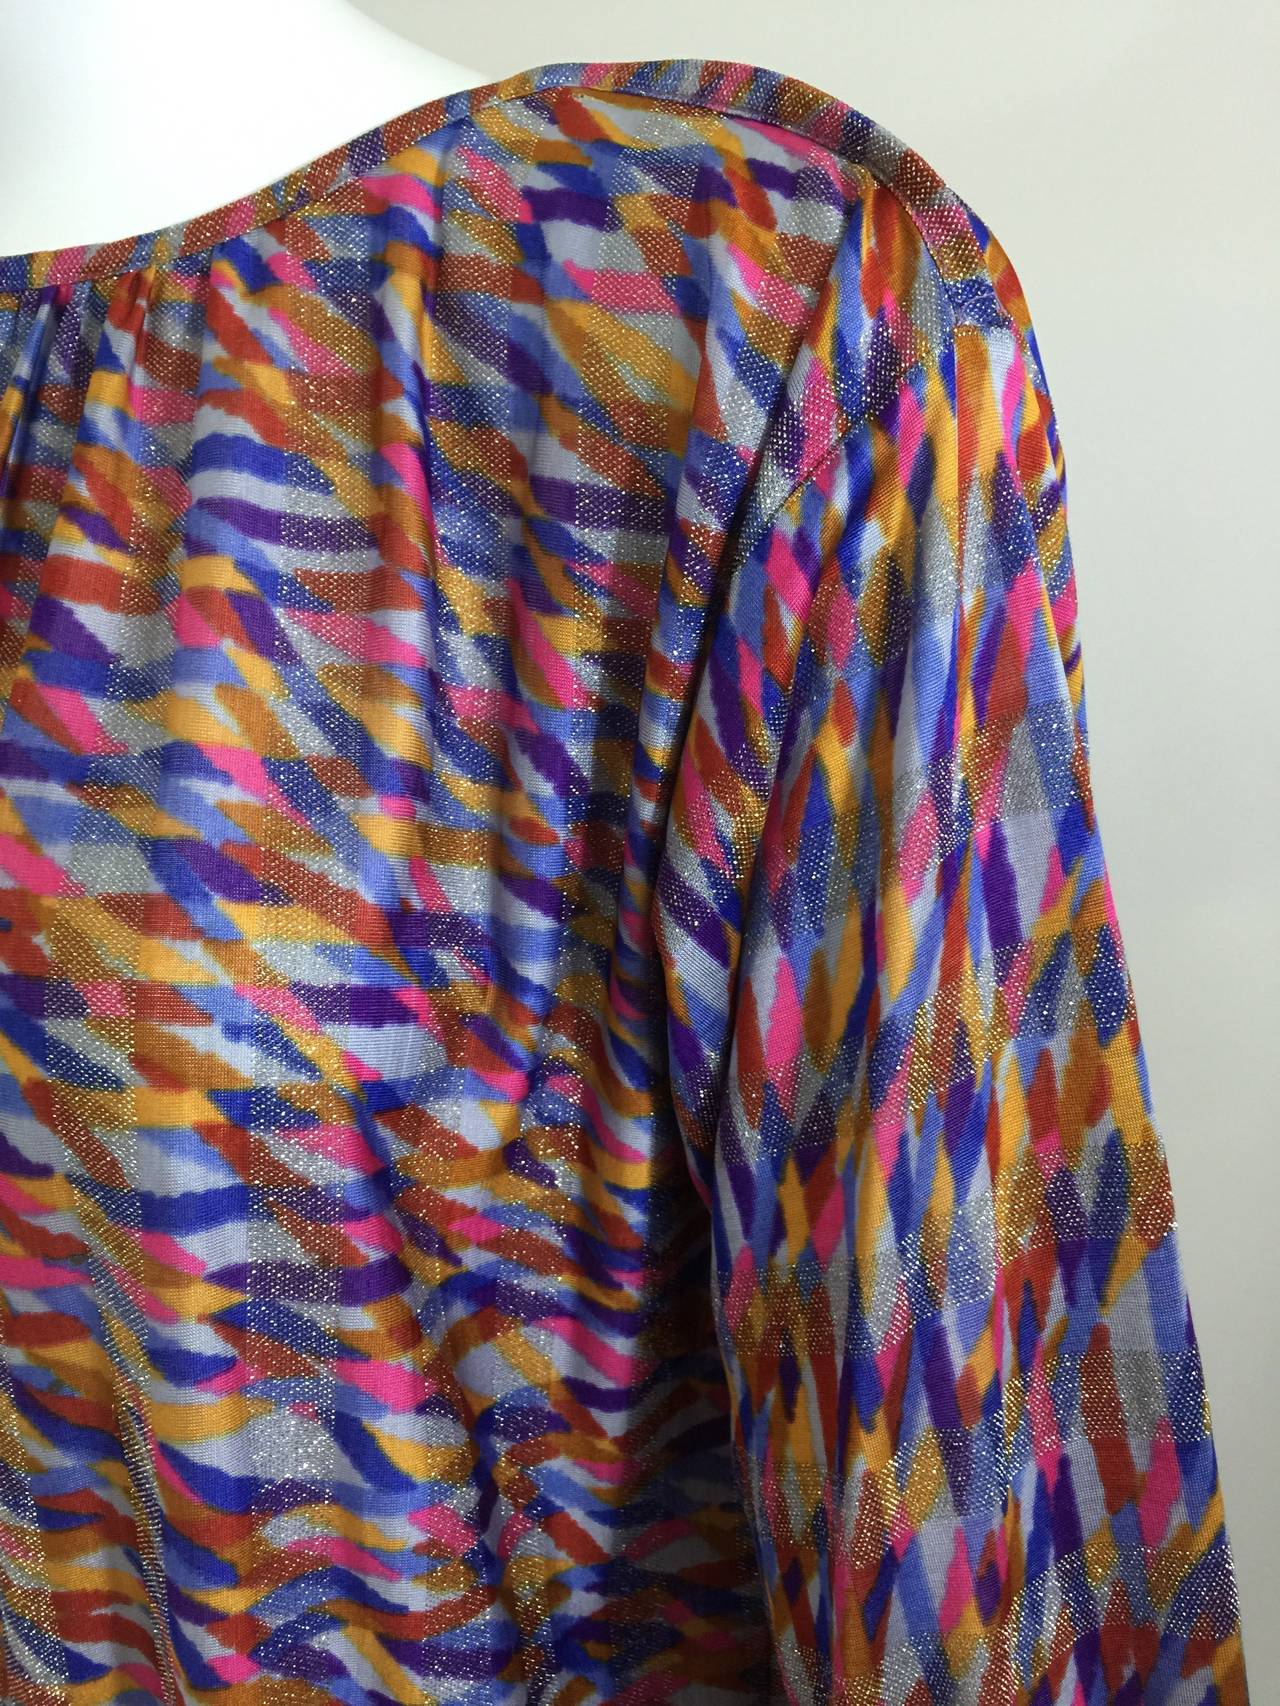 Vintage  Missoni Metallic Silk Jersey Top and Skirt Set In Good Condition For Sale In Boca Raton, FL